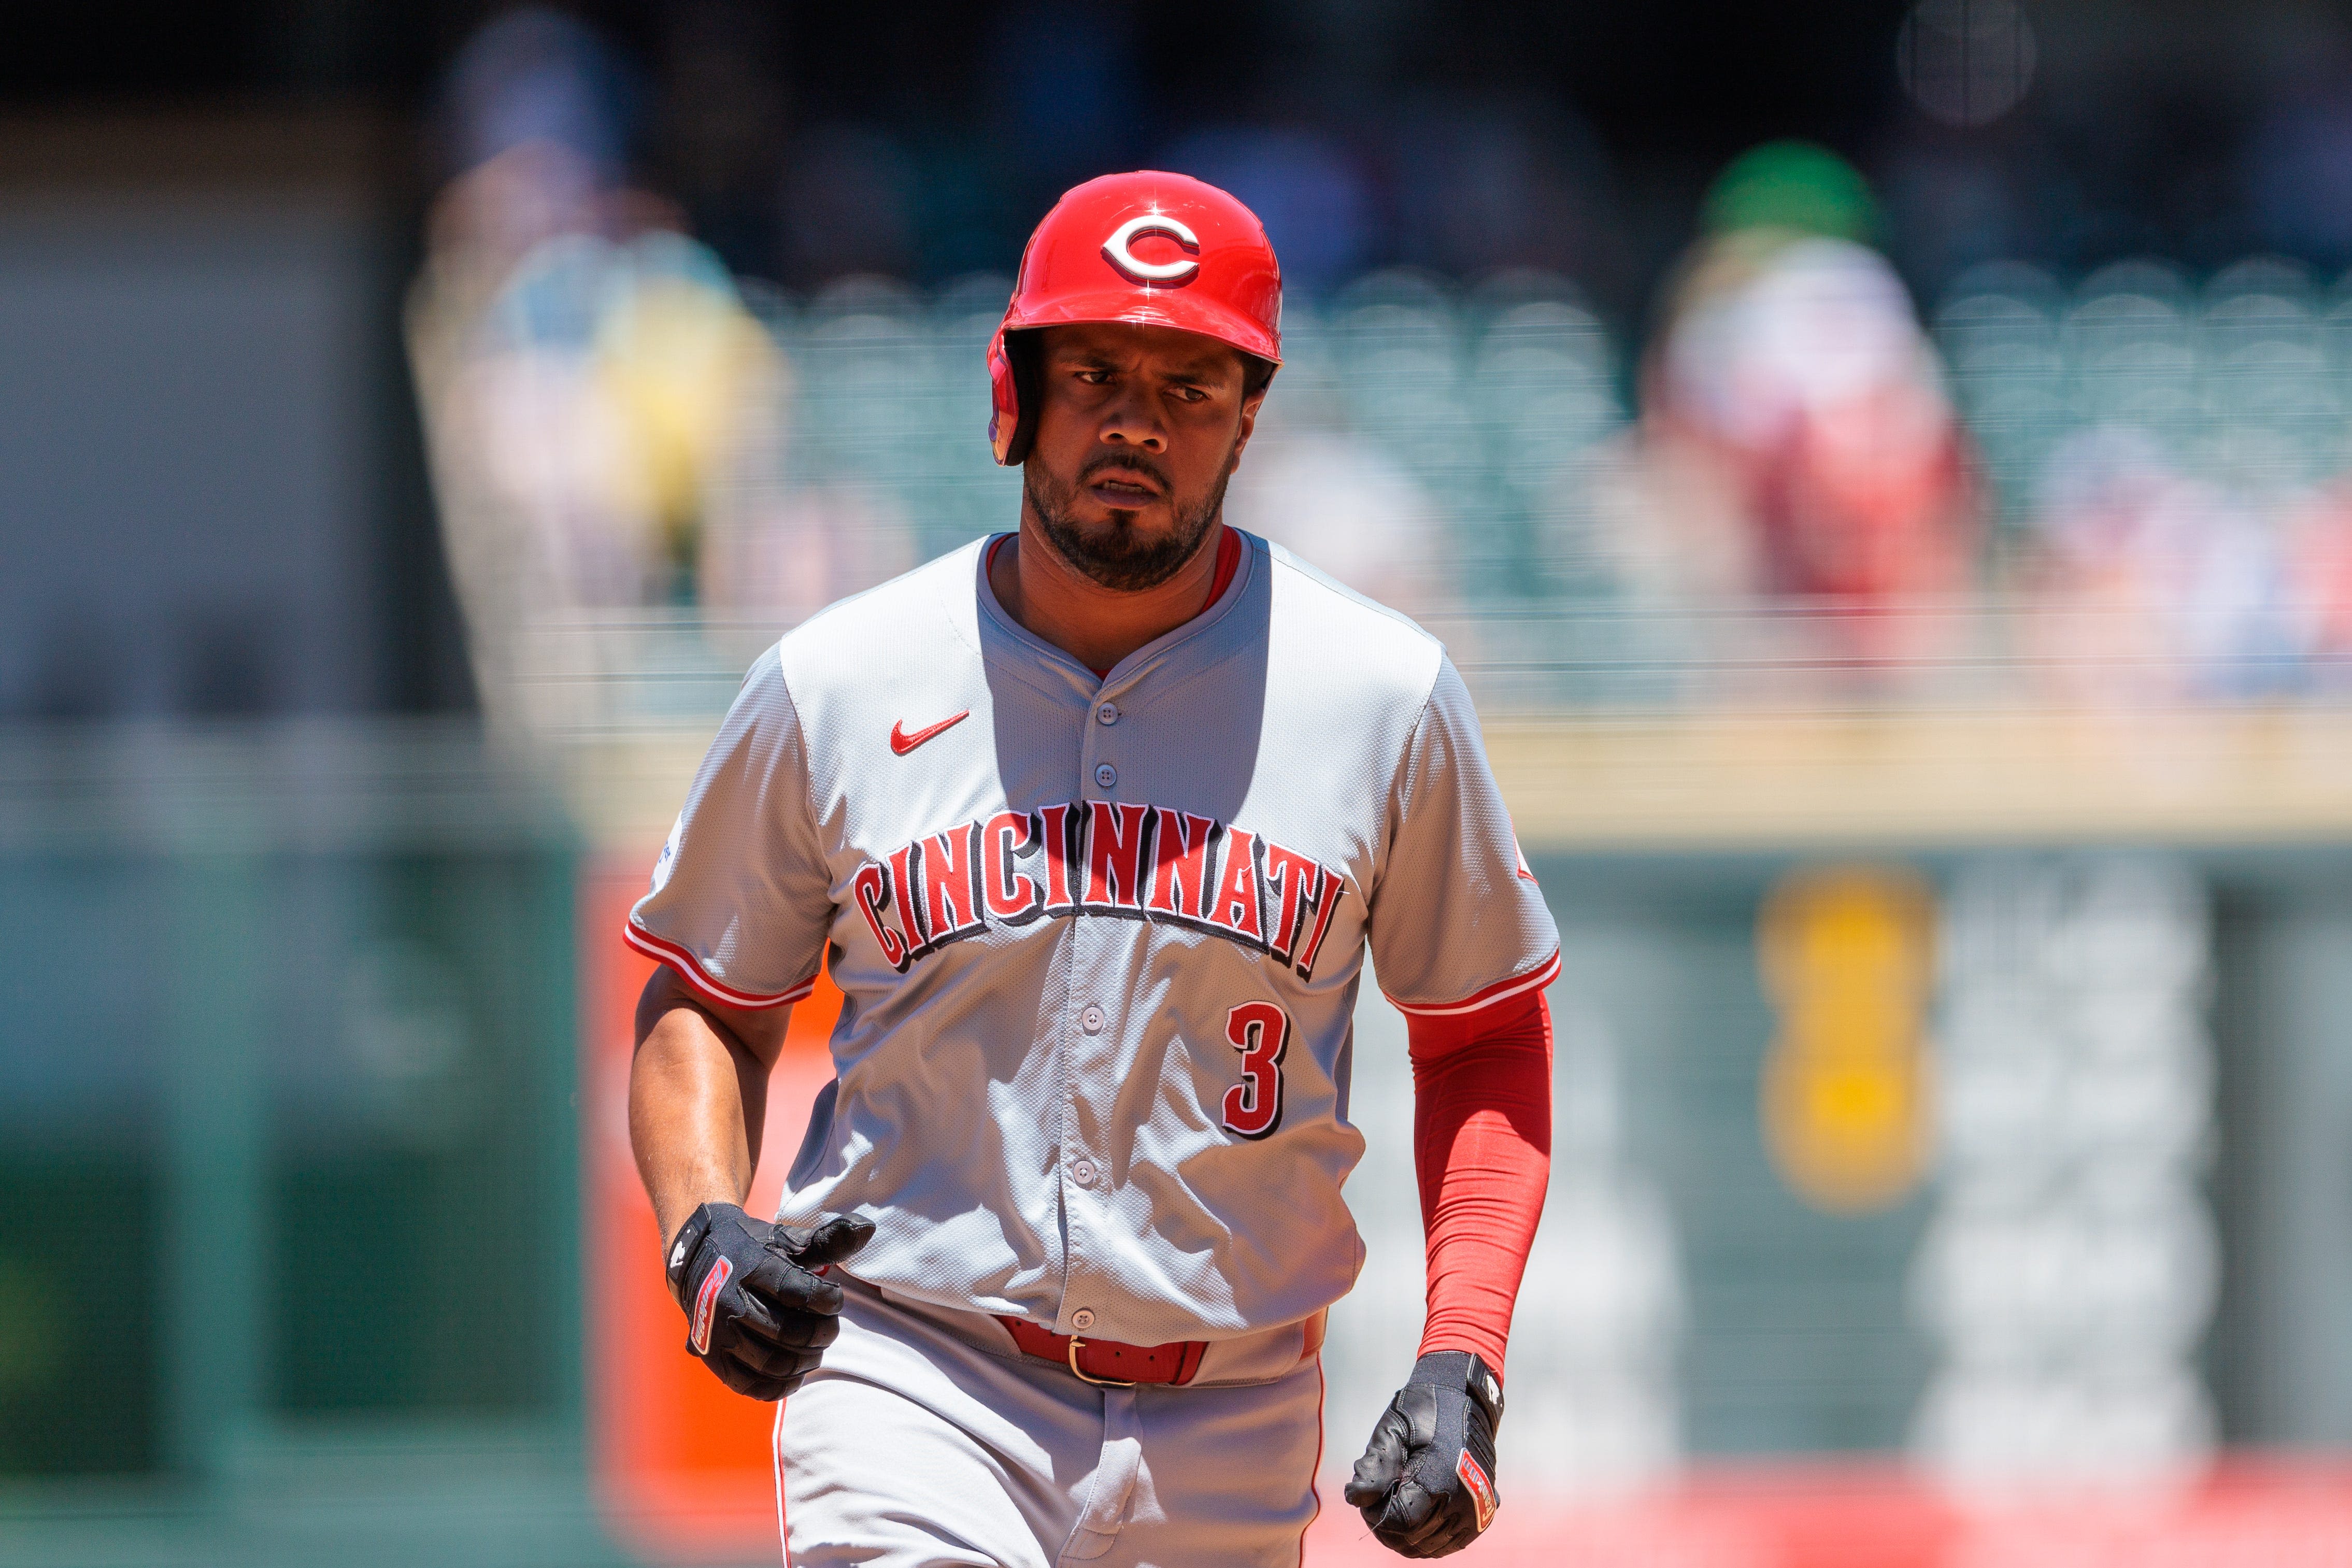 The Reds get back to their rallying ways and sweep the Rockies